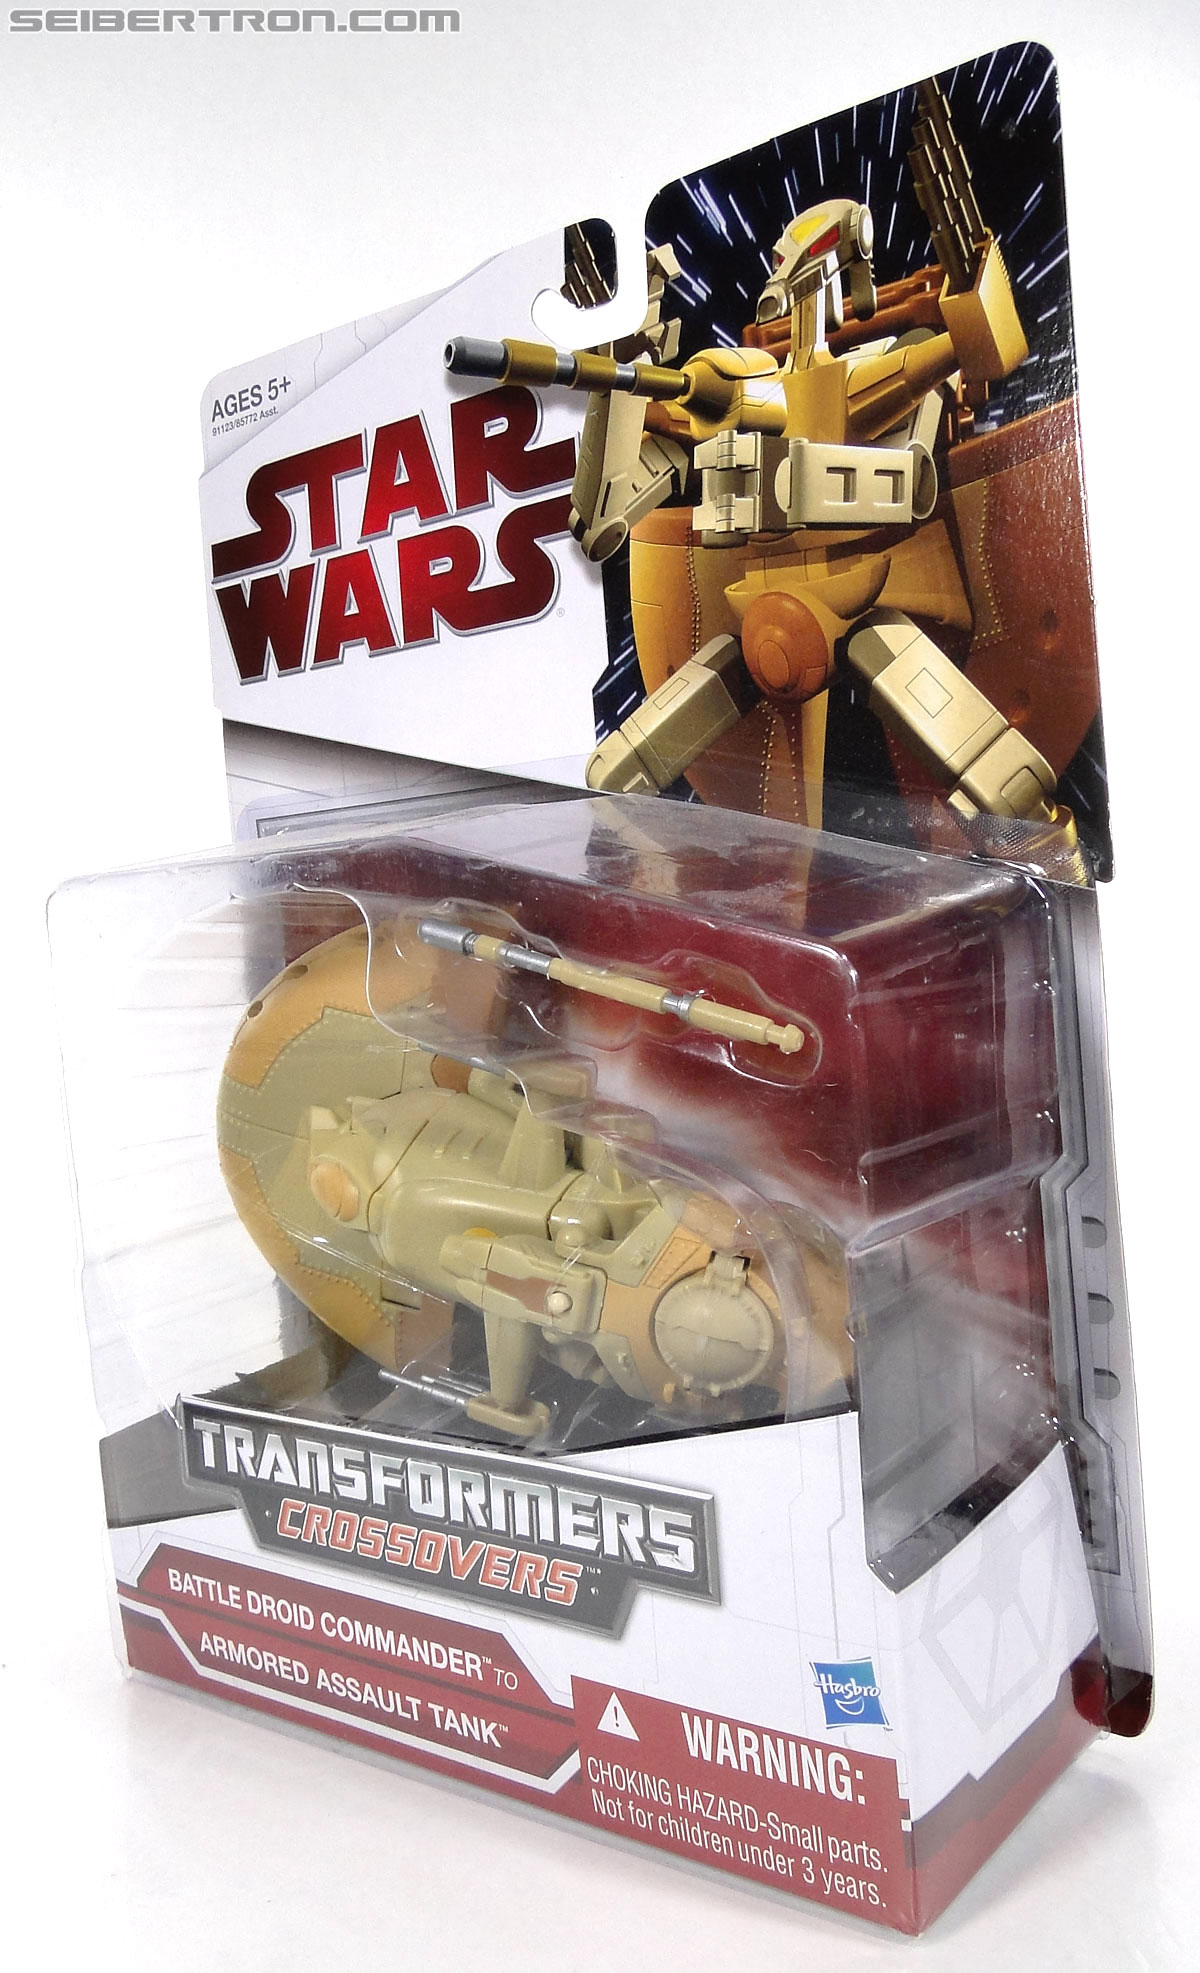 Star Wars Transformers Battle Droid Commader (Armored Assault Tank) (Battle Droid Commader) (Image #11 of 85)